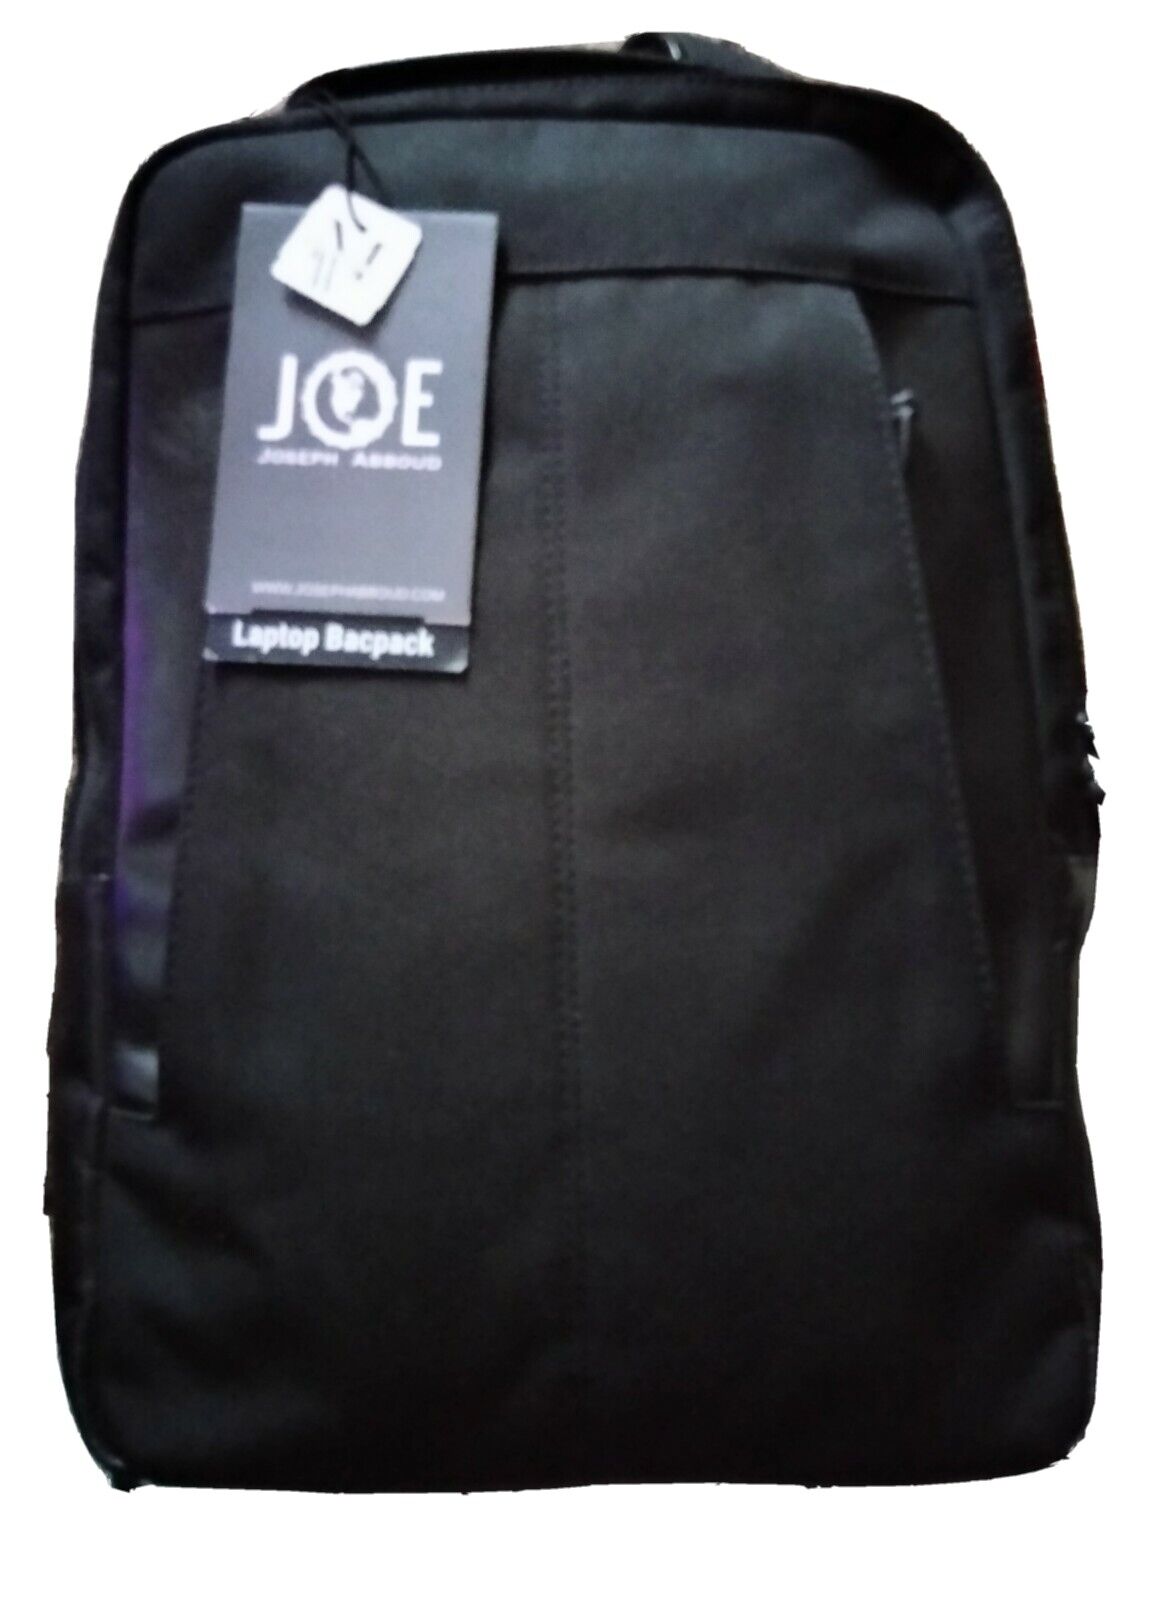 JOE Joseph Abboud Black Leather and Canvas Laptop Computer Backpack New w/ Tags